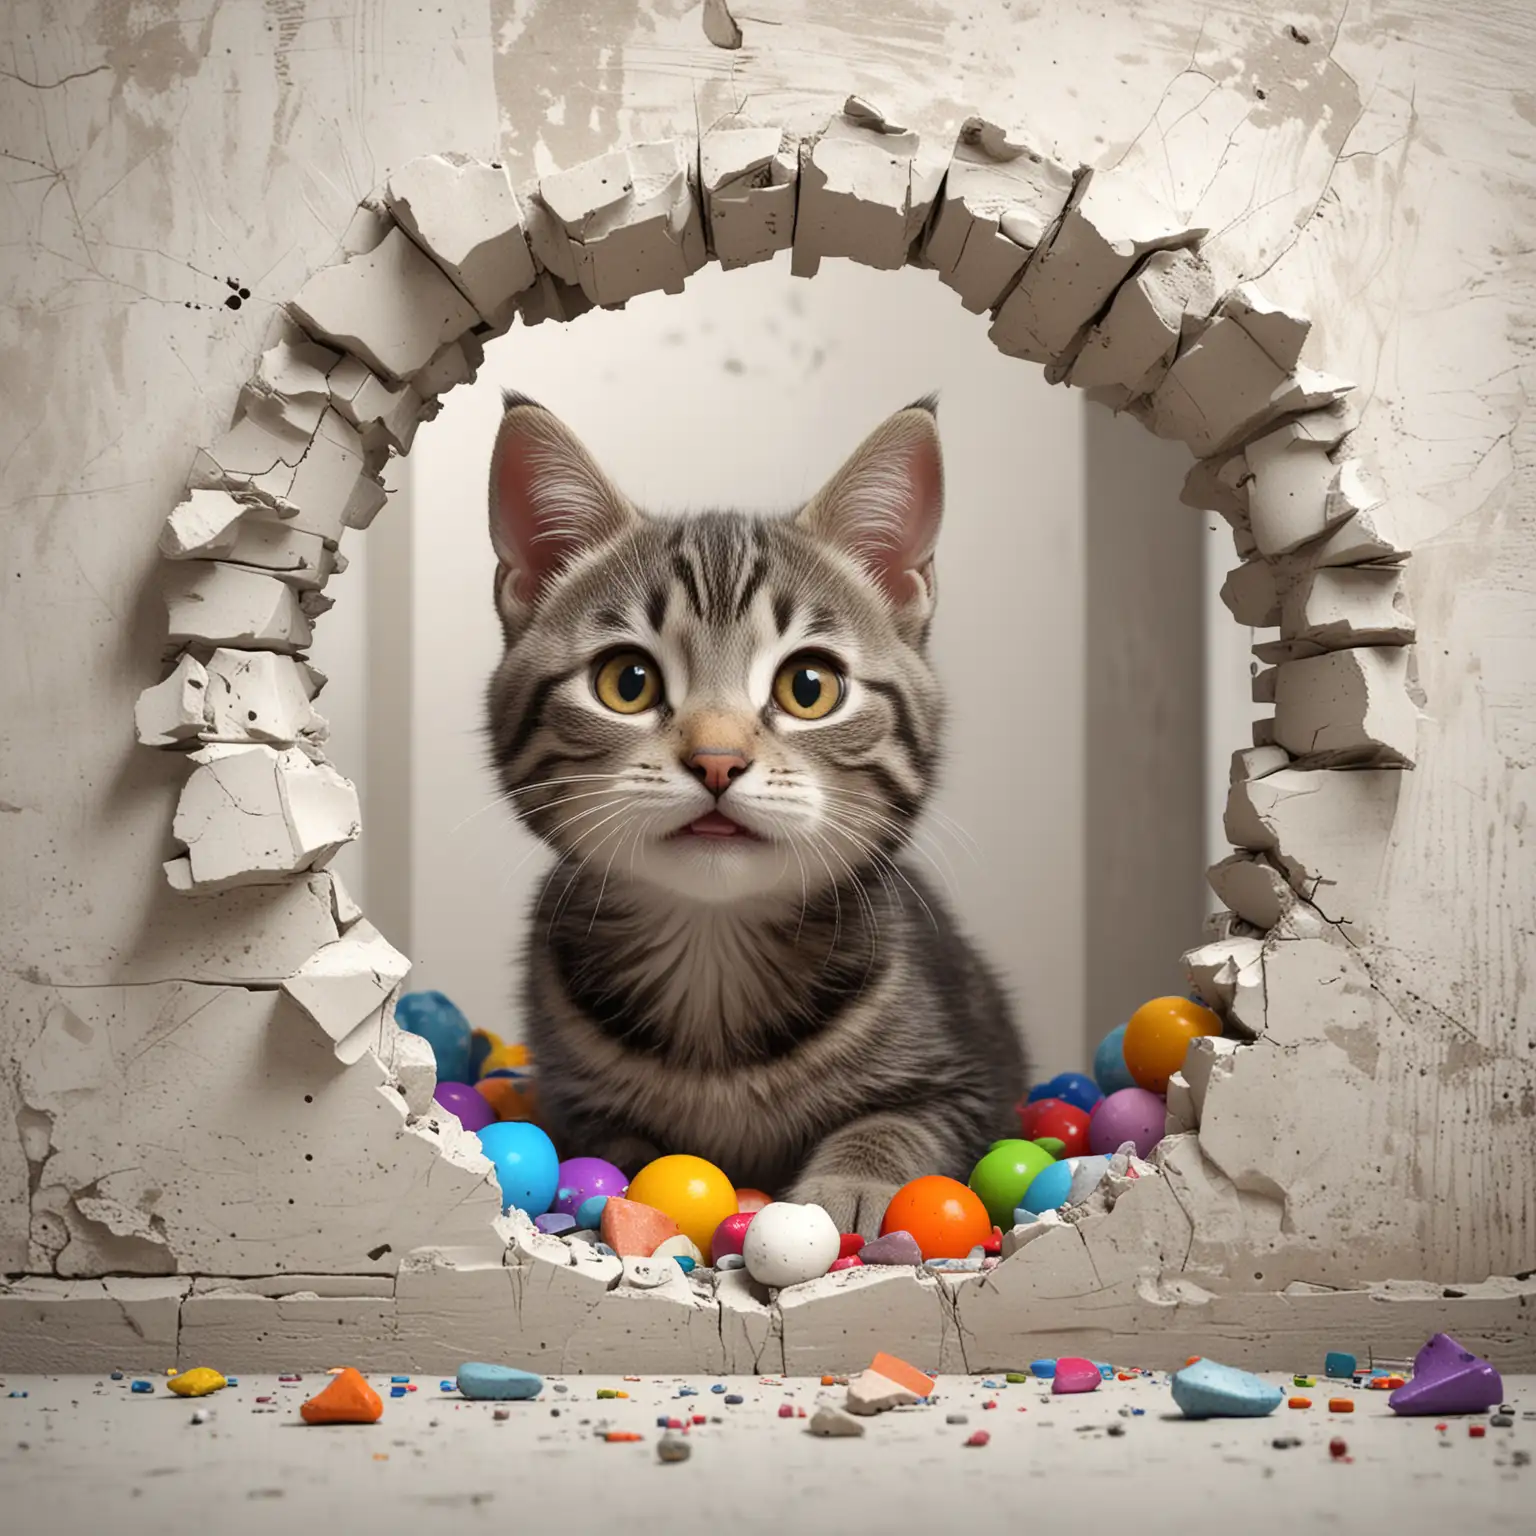 Cheerful Gray Tabby Kitty Playing in Colorful Surroundings